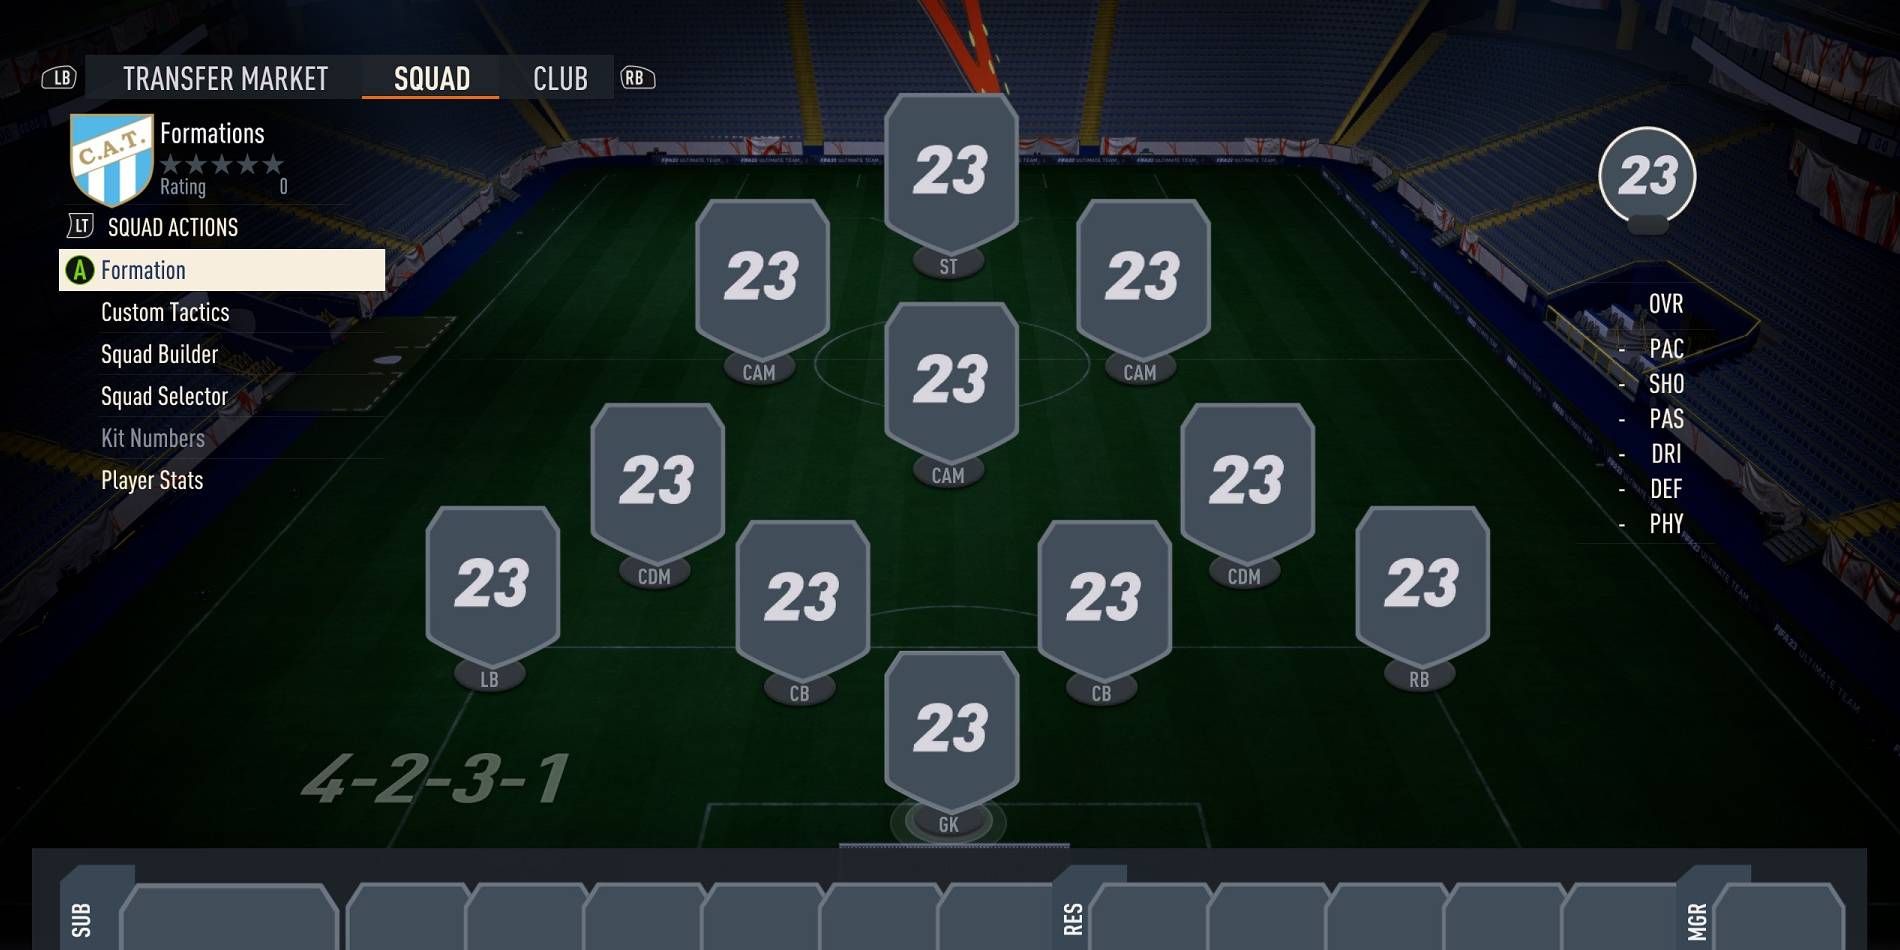 FIFA 23 Pro Clubs Formation Selection with 11 Spots to Organize Throughout a Player's Squad, Currently in 4-2-3-1